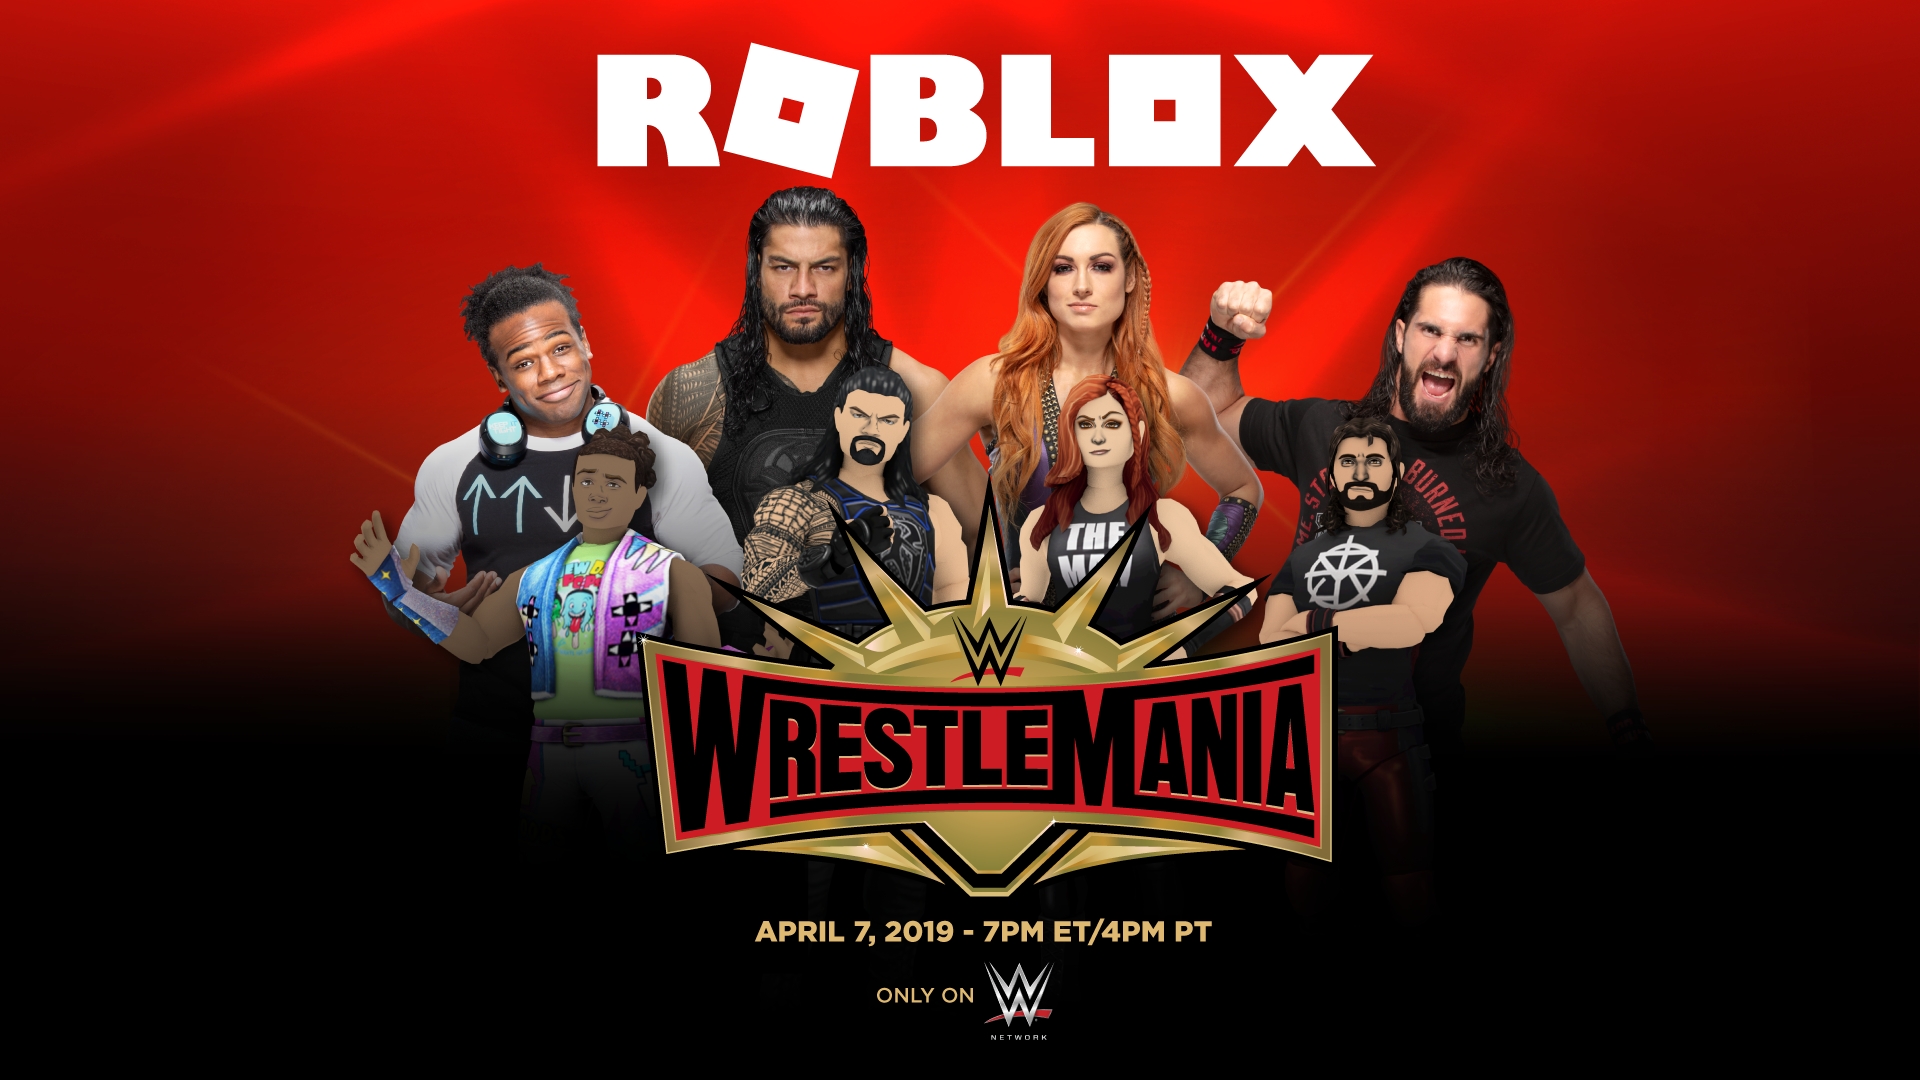 Roblox And Wwe Partner To Celebrate Wrestlemania Business Wire - roblox partner with wwe to celebrate wrestlemania mirror